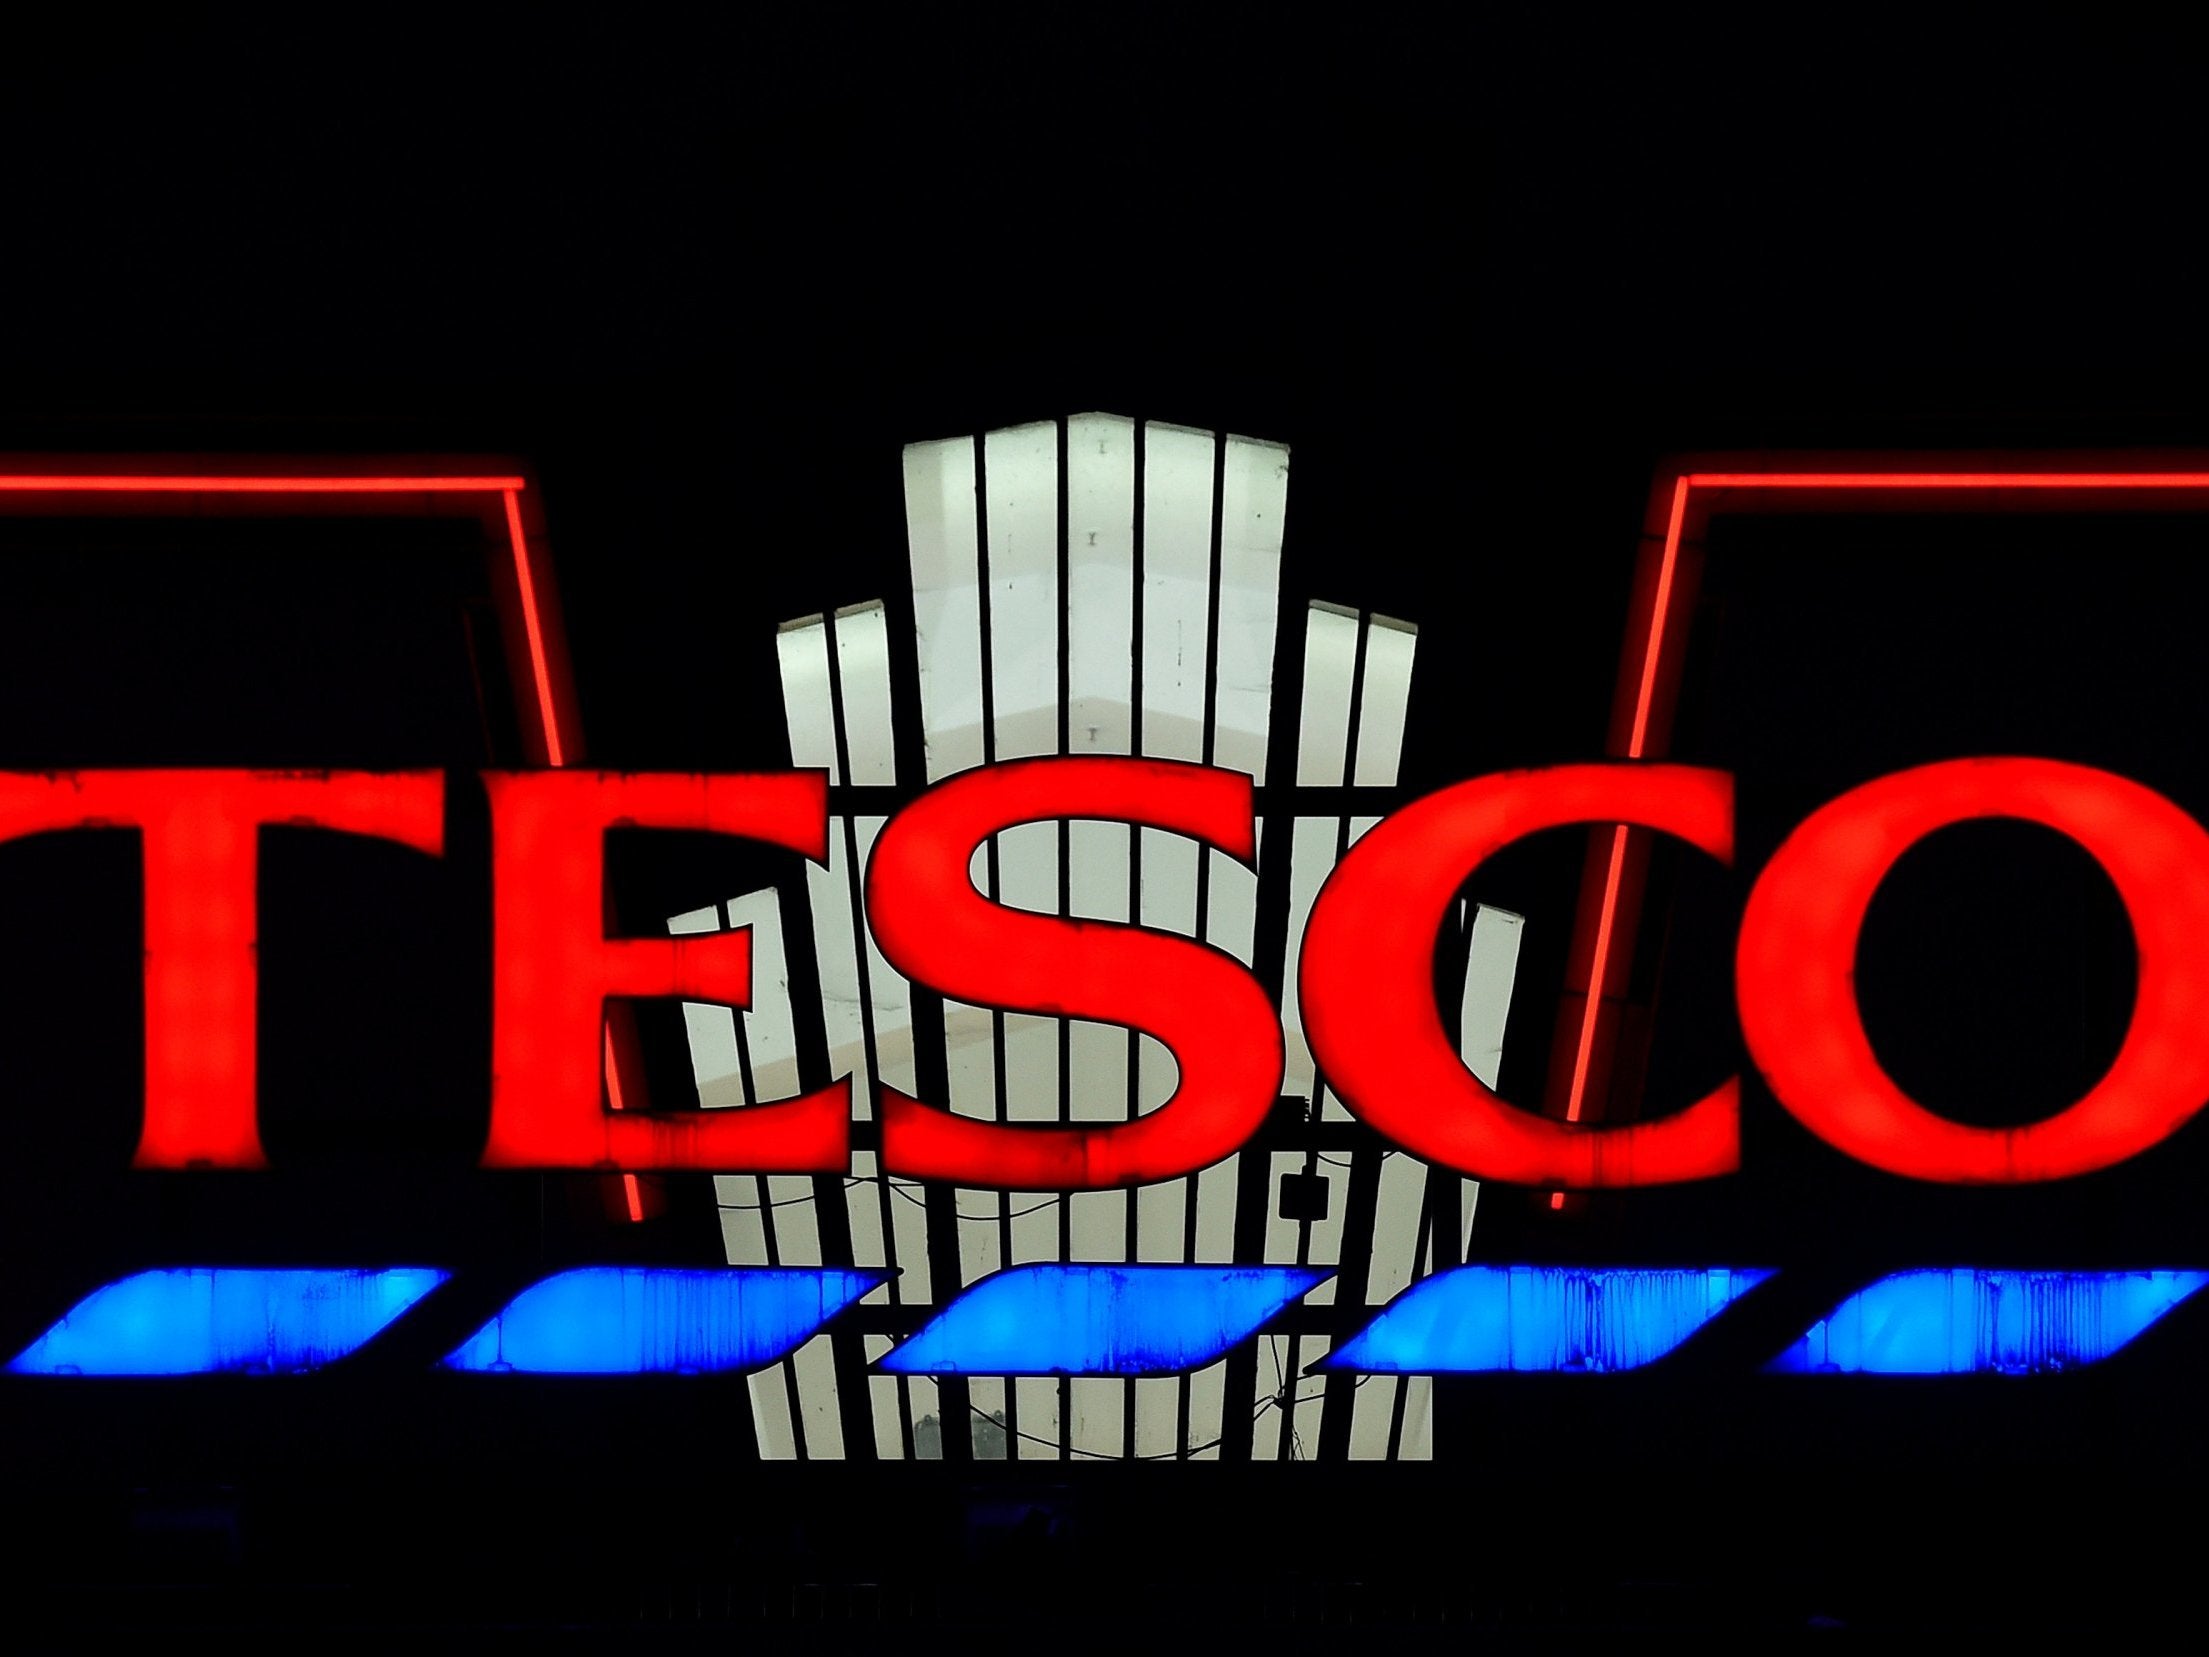 Tesco is reviewing its businesses in Thailand and Malaysia which may lead to their sale